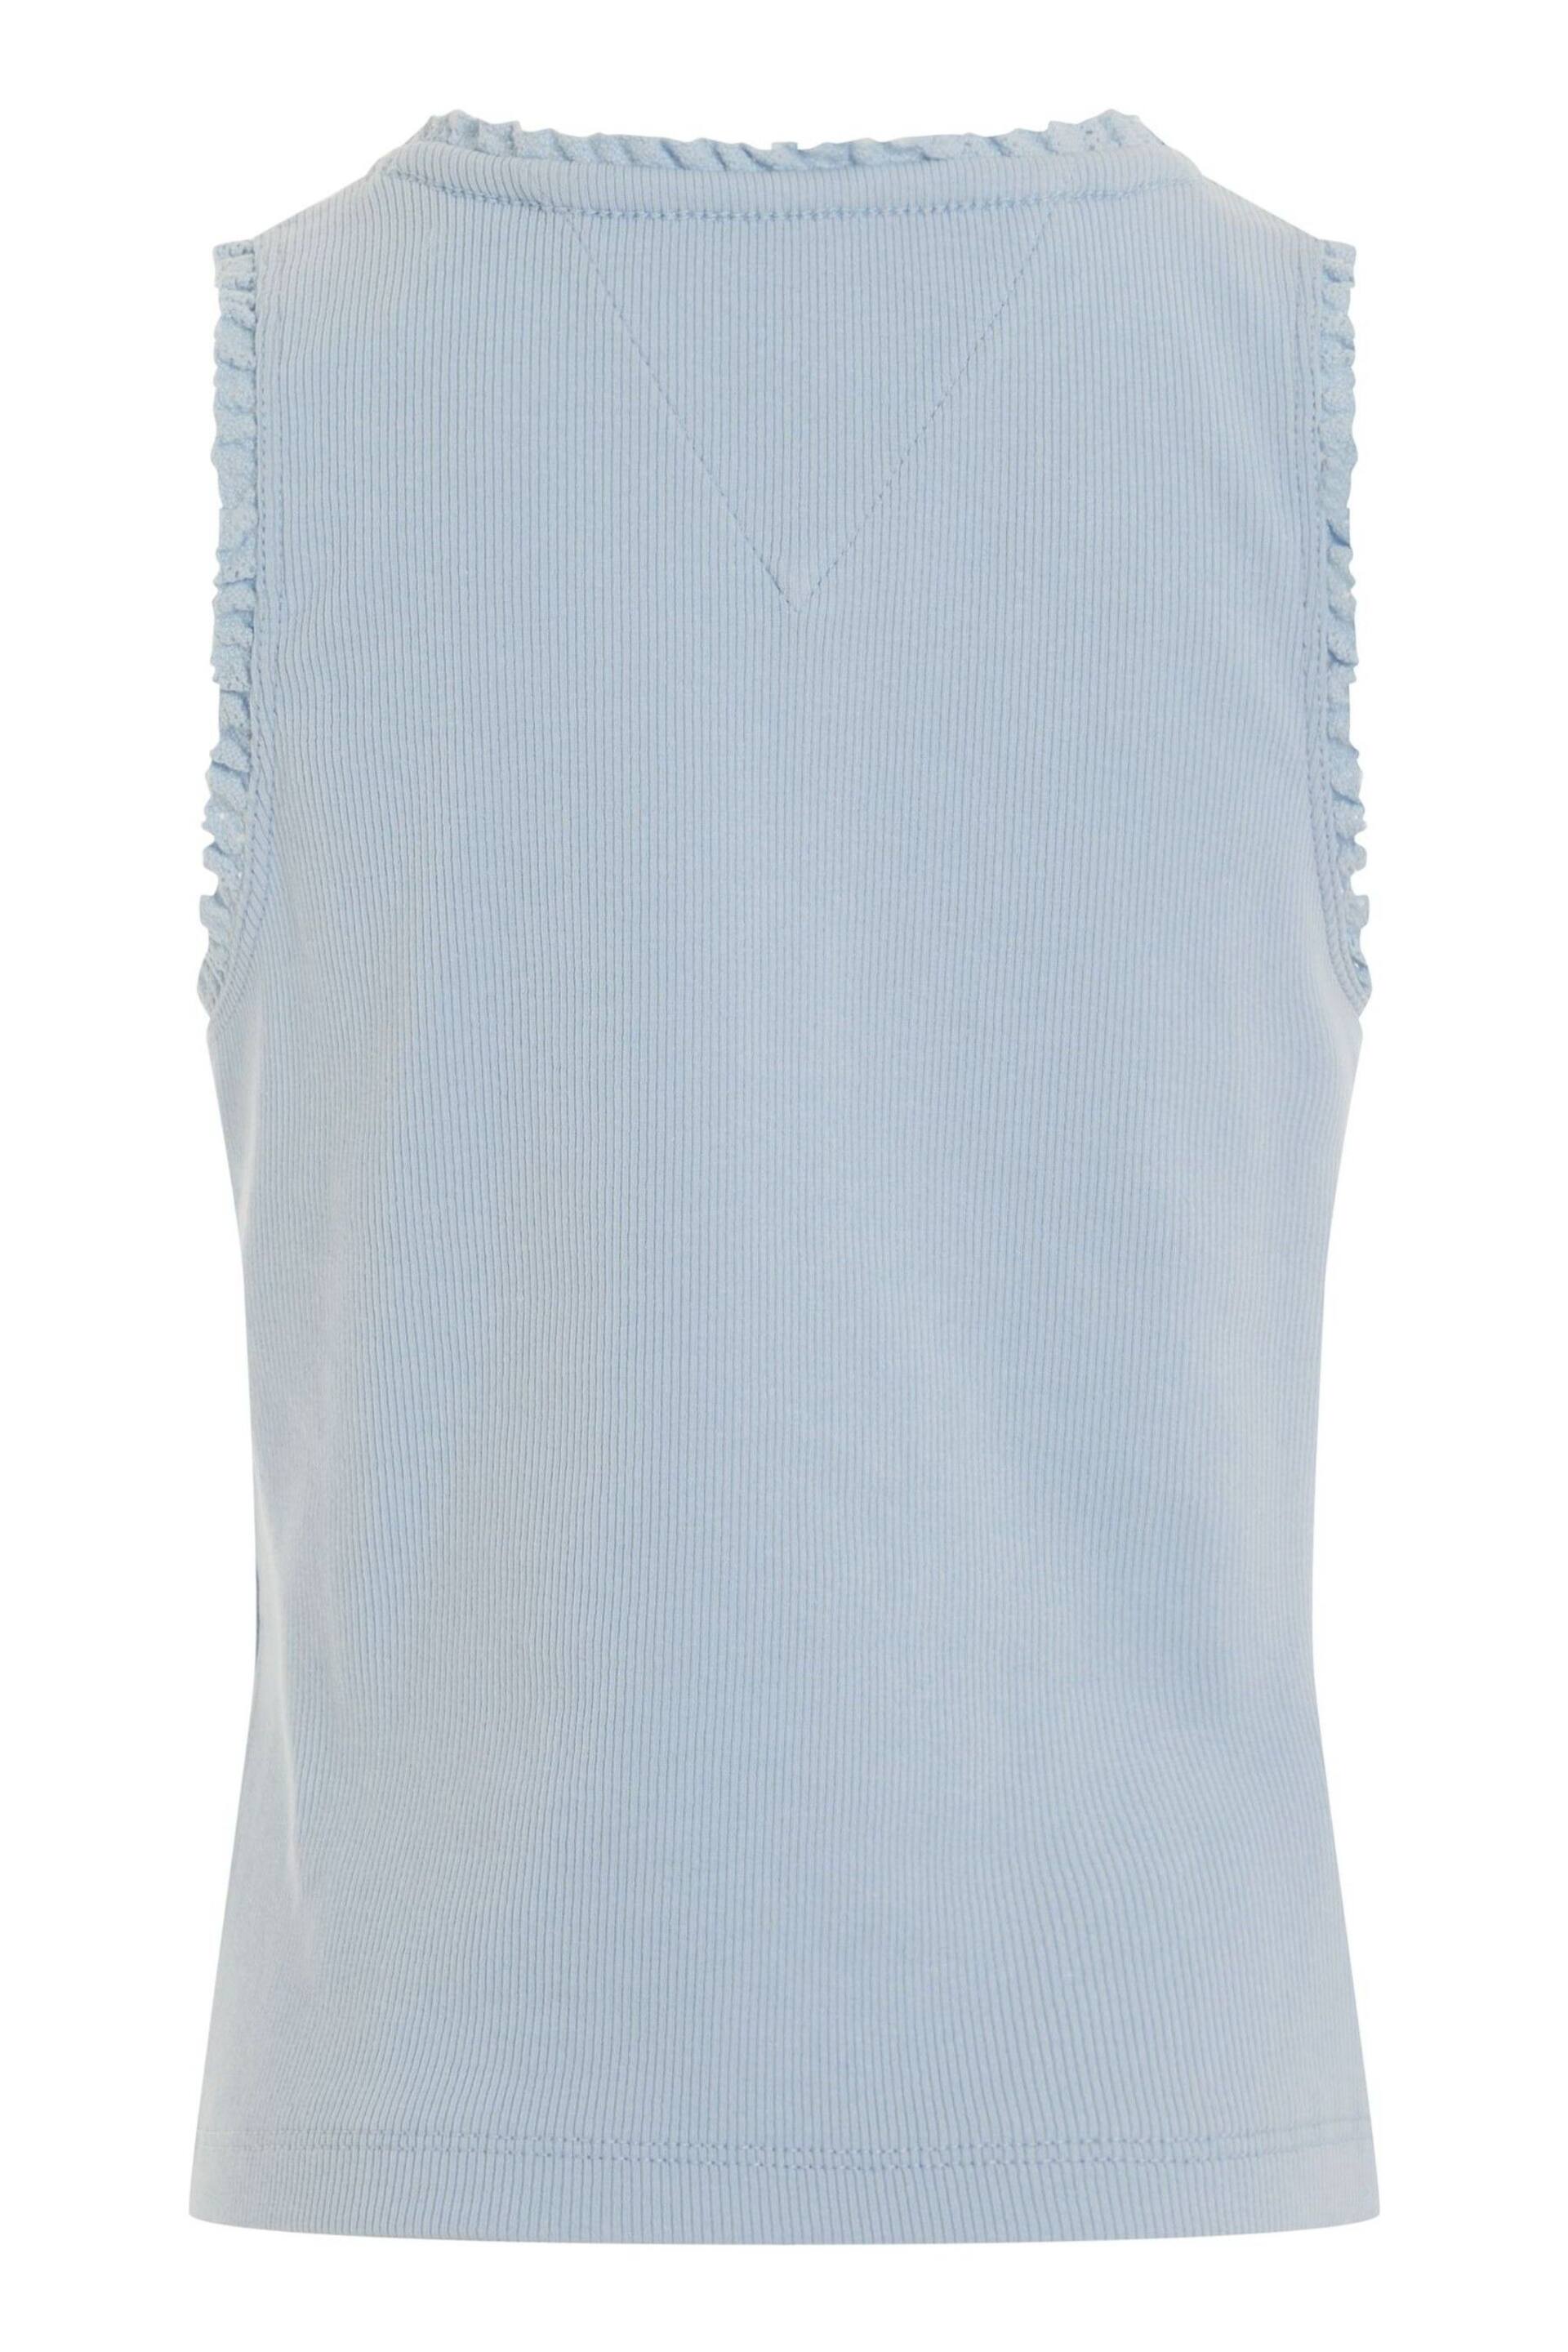 Tommy Hilfiger Blue Essential Tank Top - Image 6 of 7